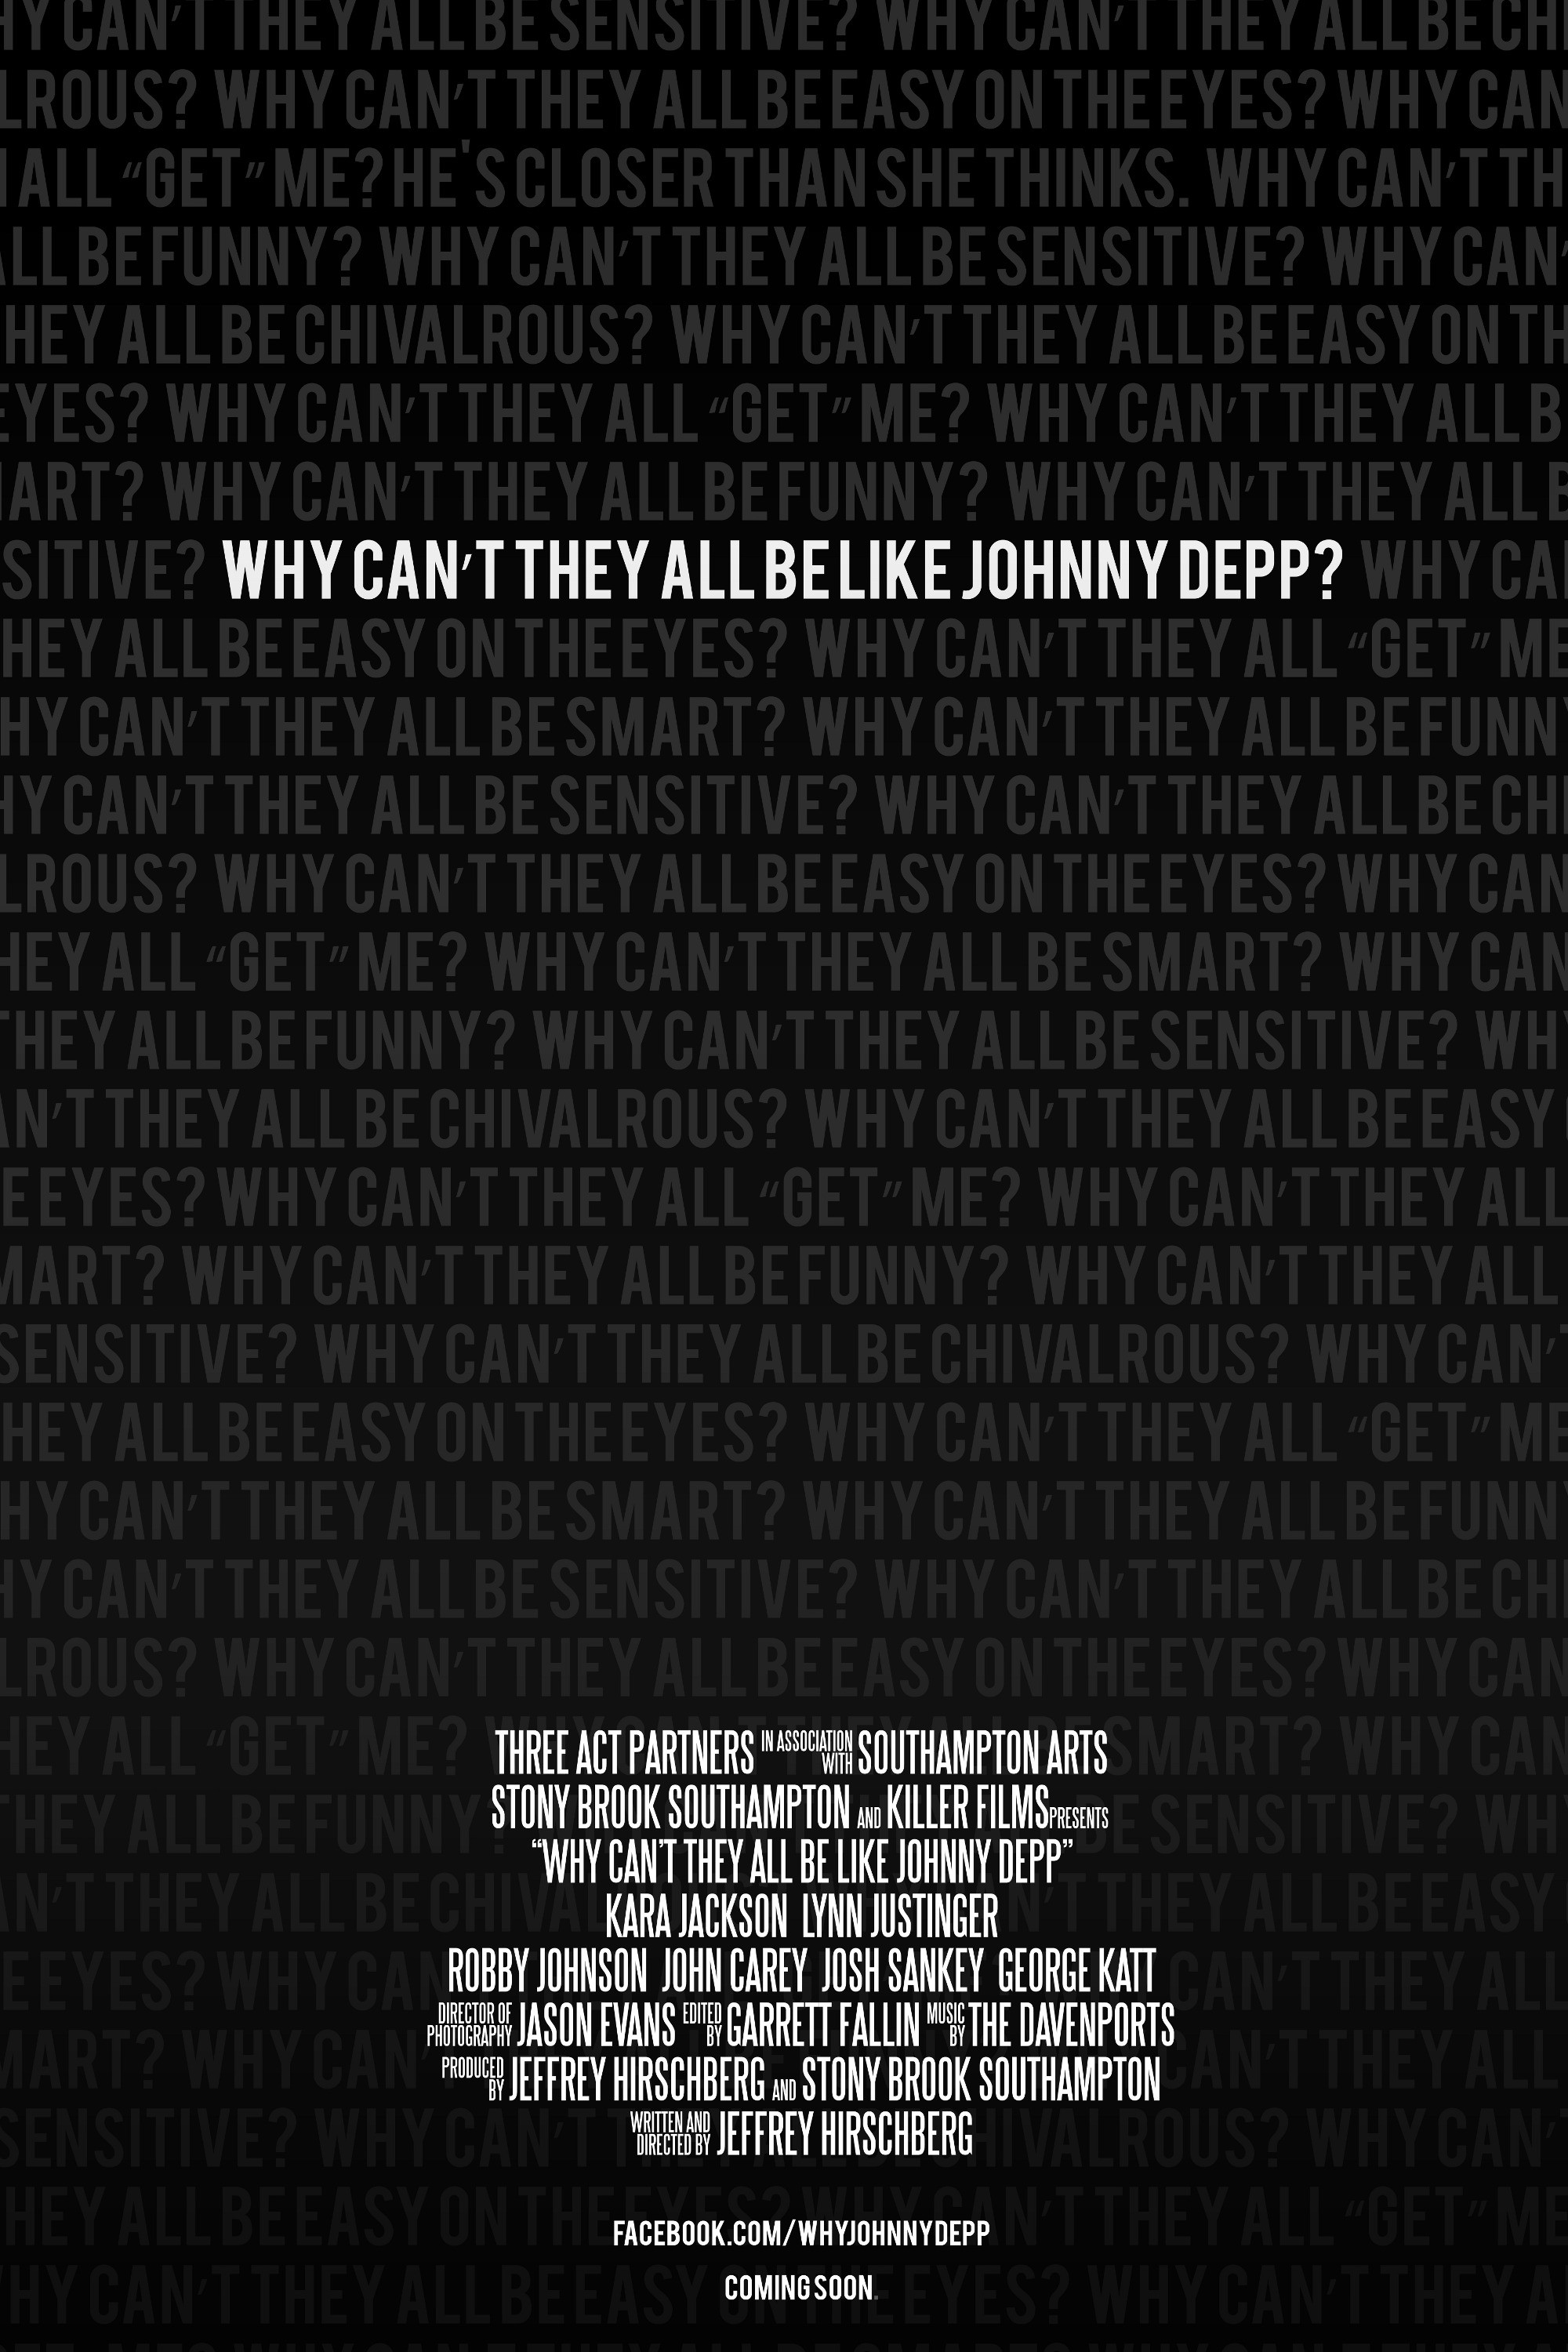 Mega Sized Movie Poster Image for Why Can't They All Be Like Johnny Depp?